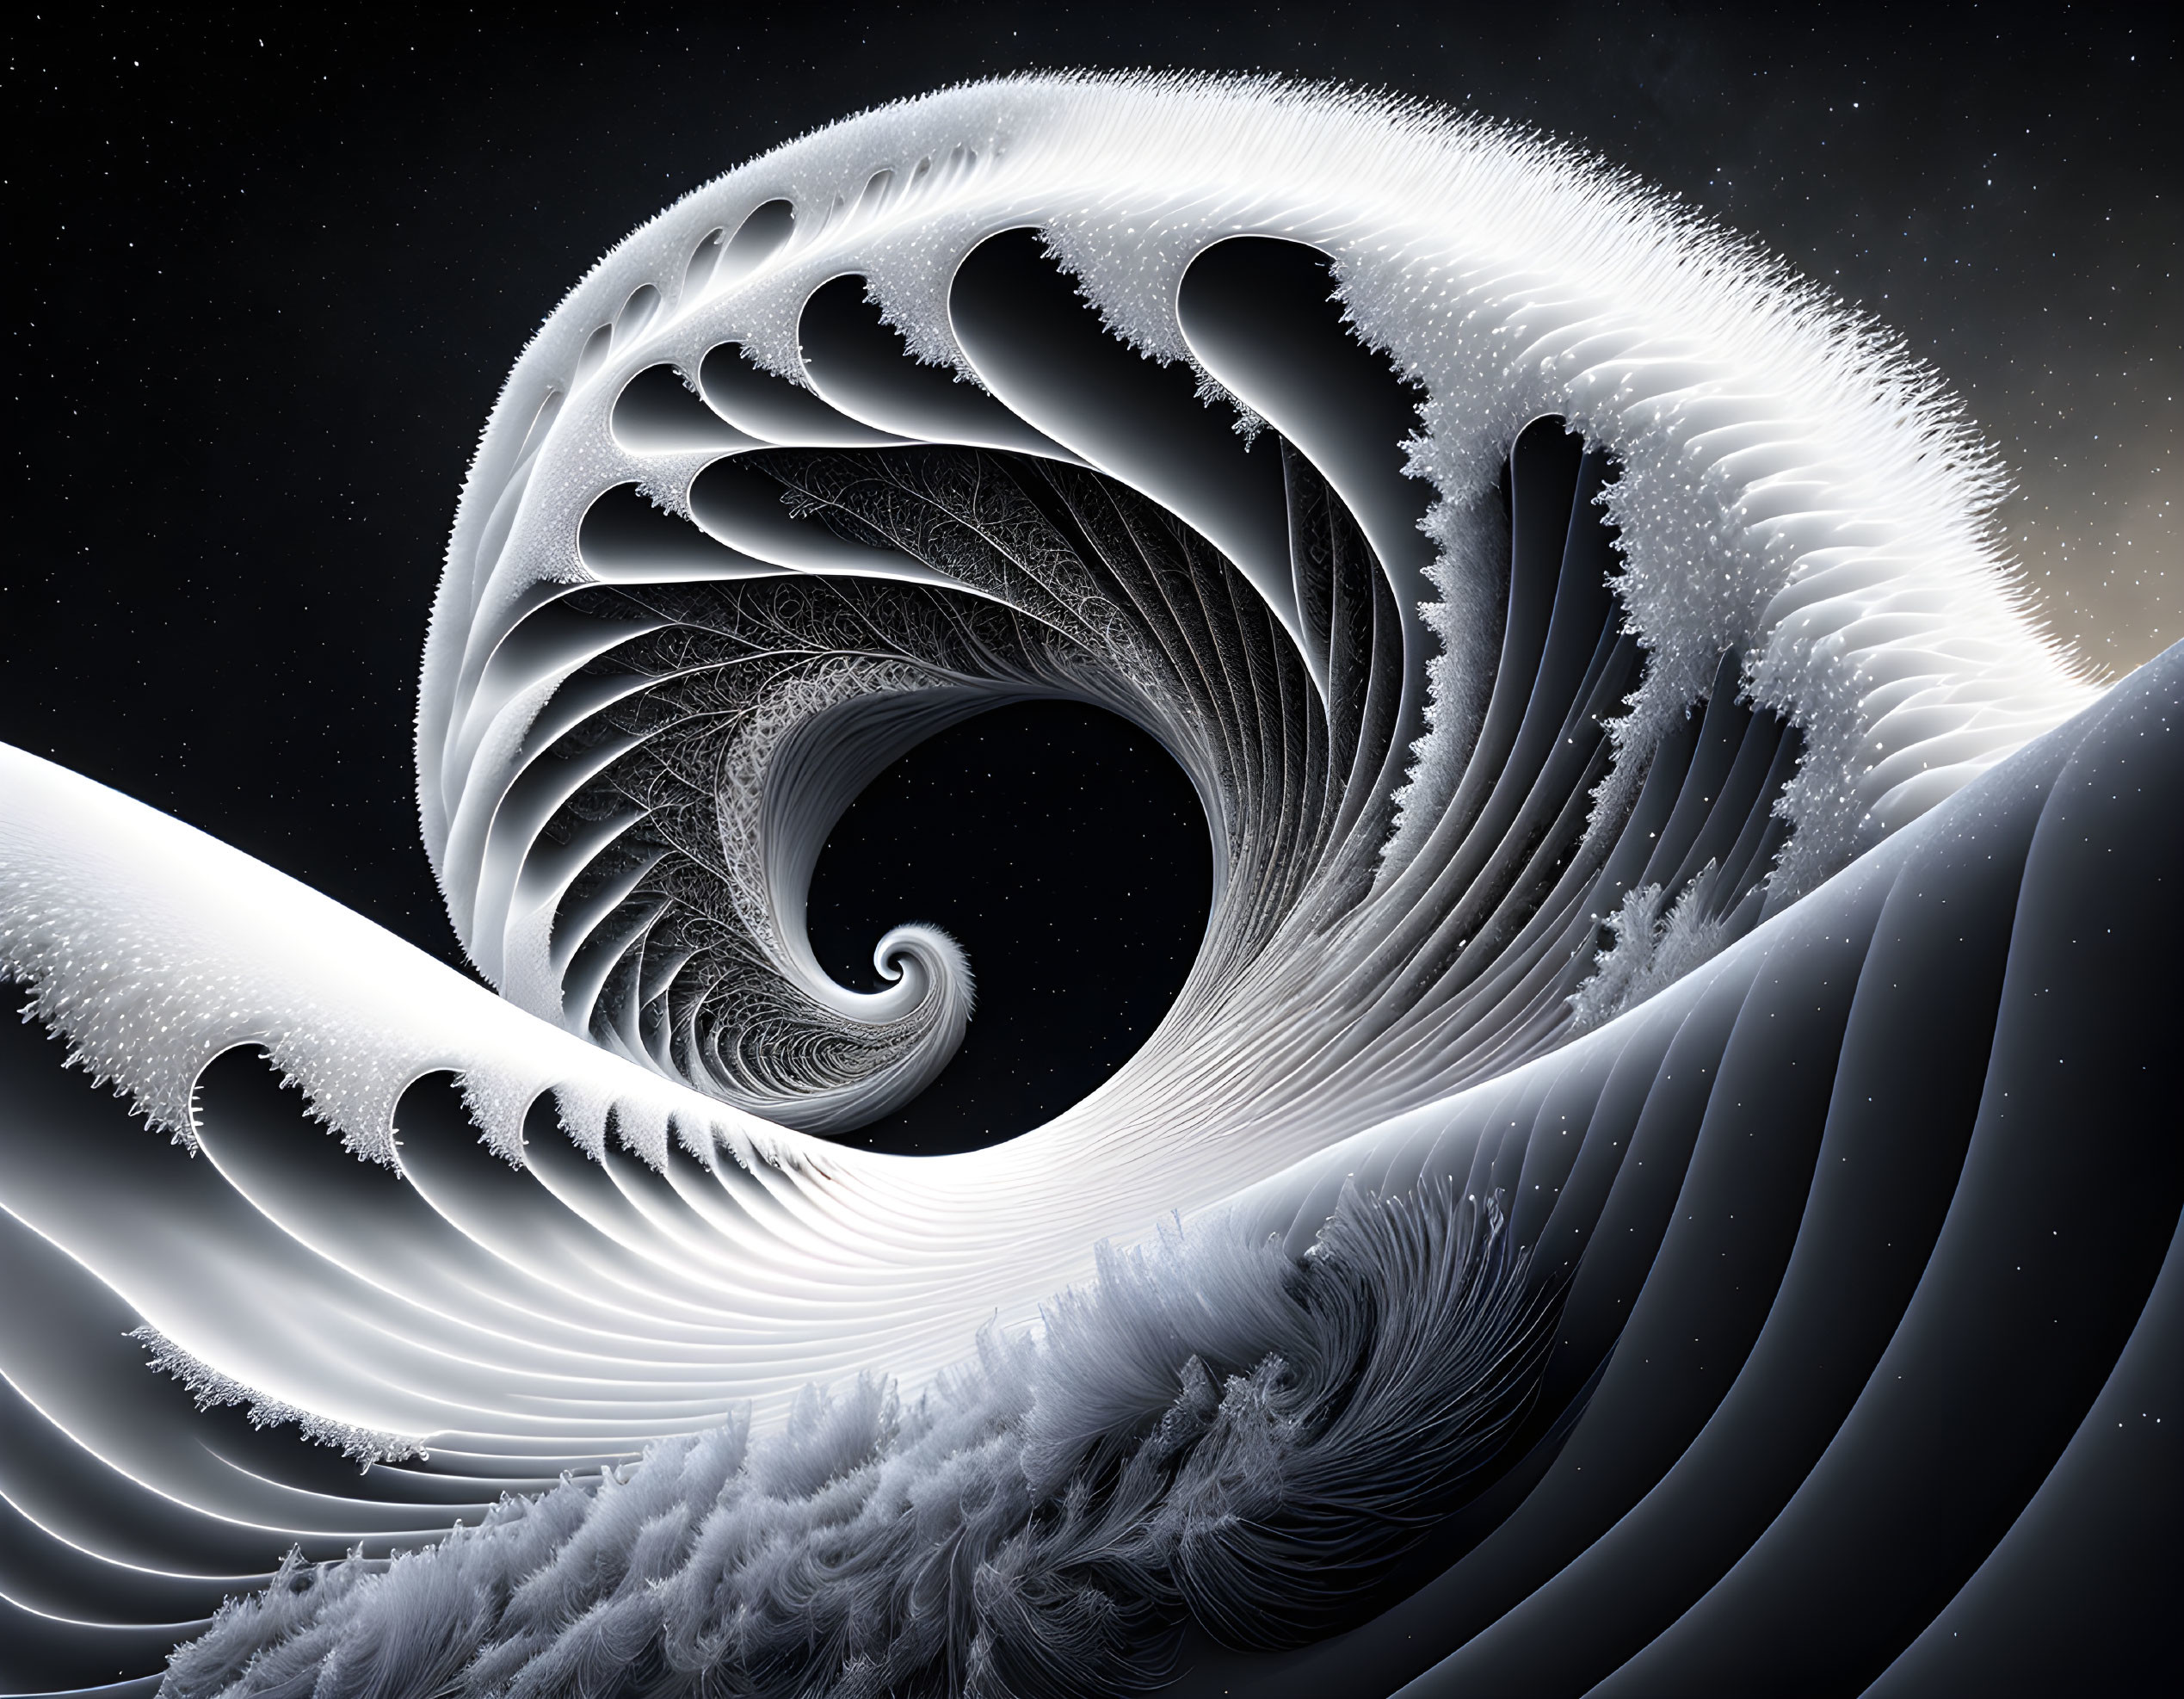 Intricate spiral fractal design in white and grey tones on starry night sky.